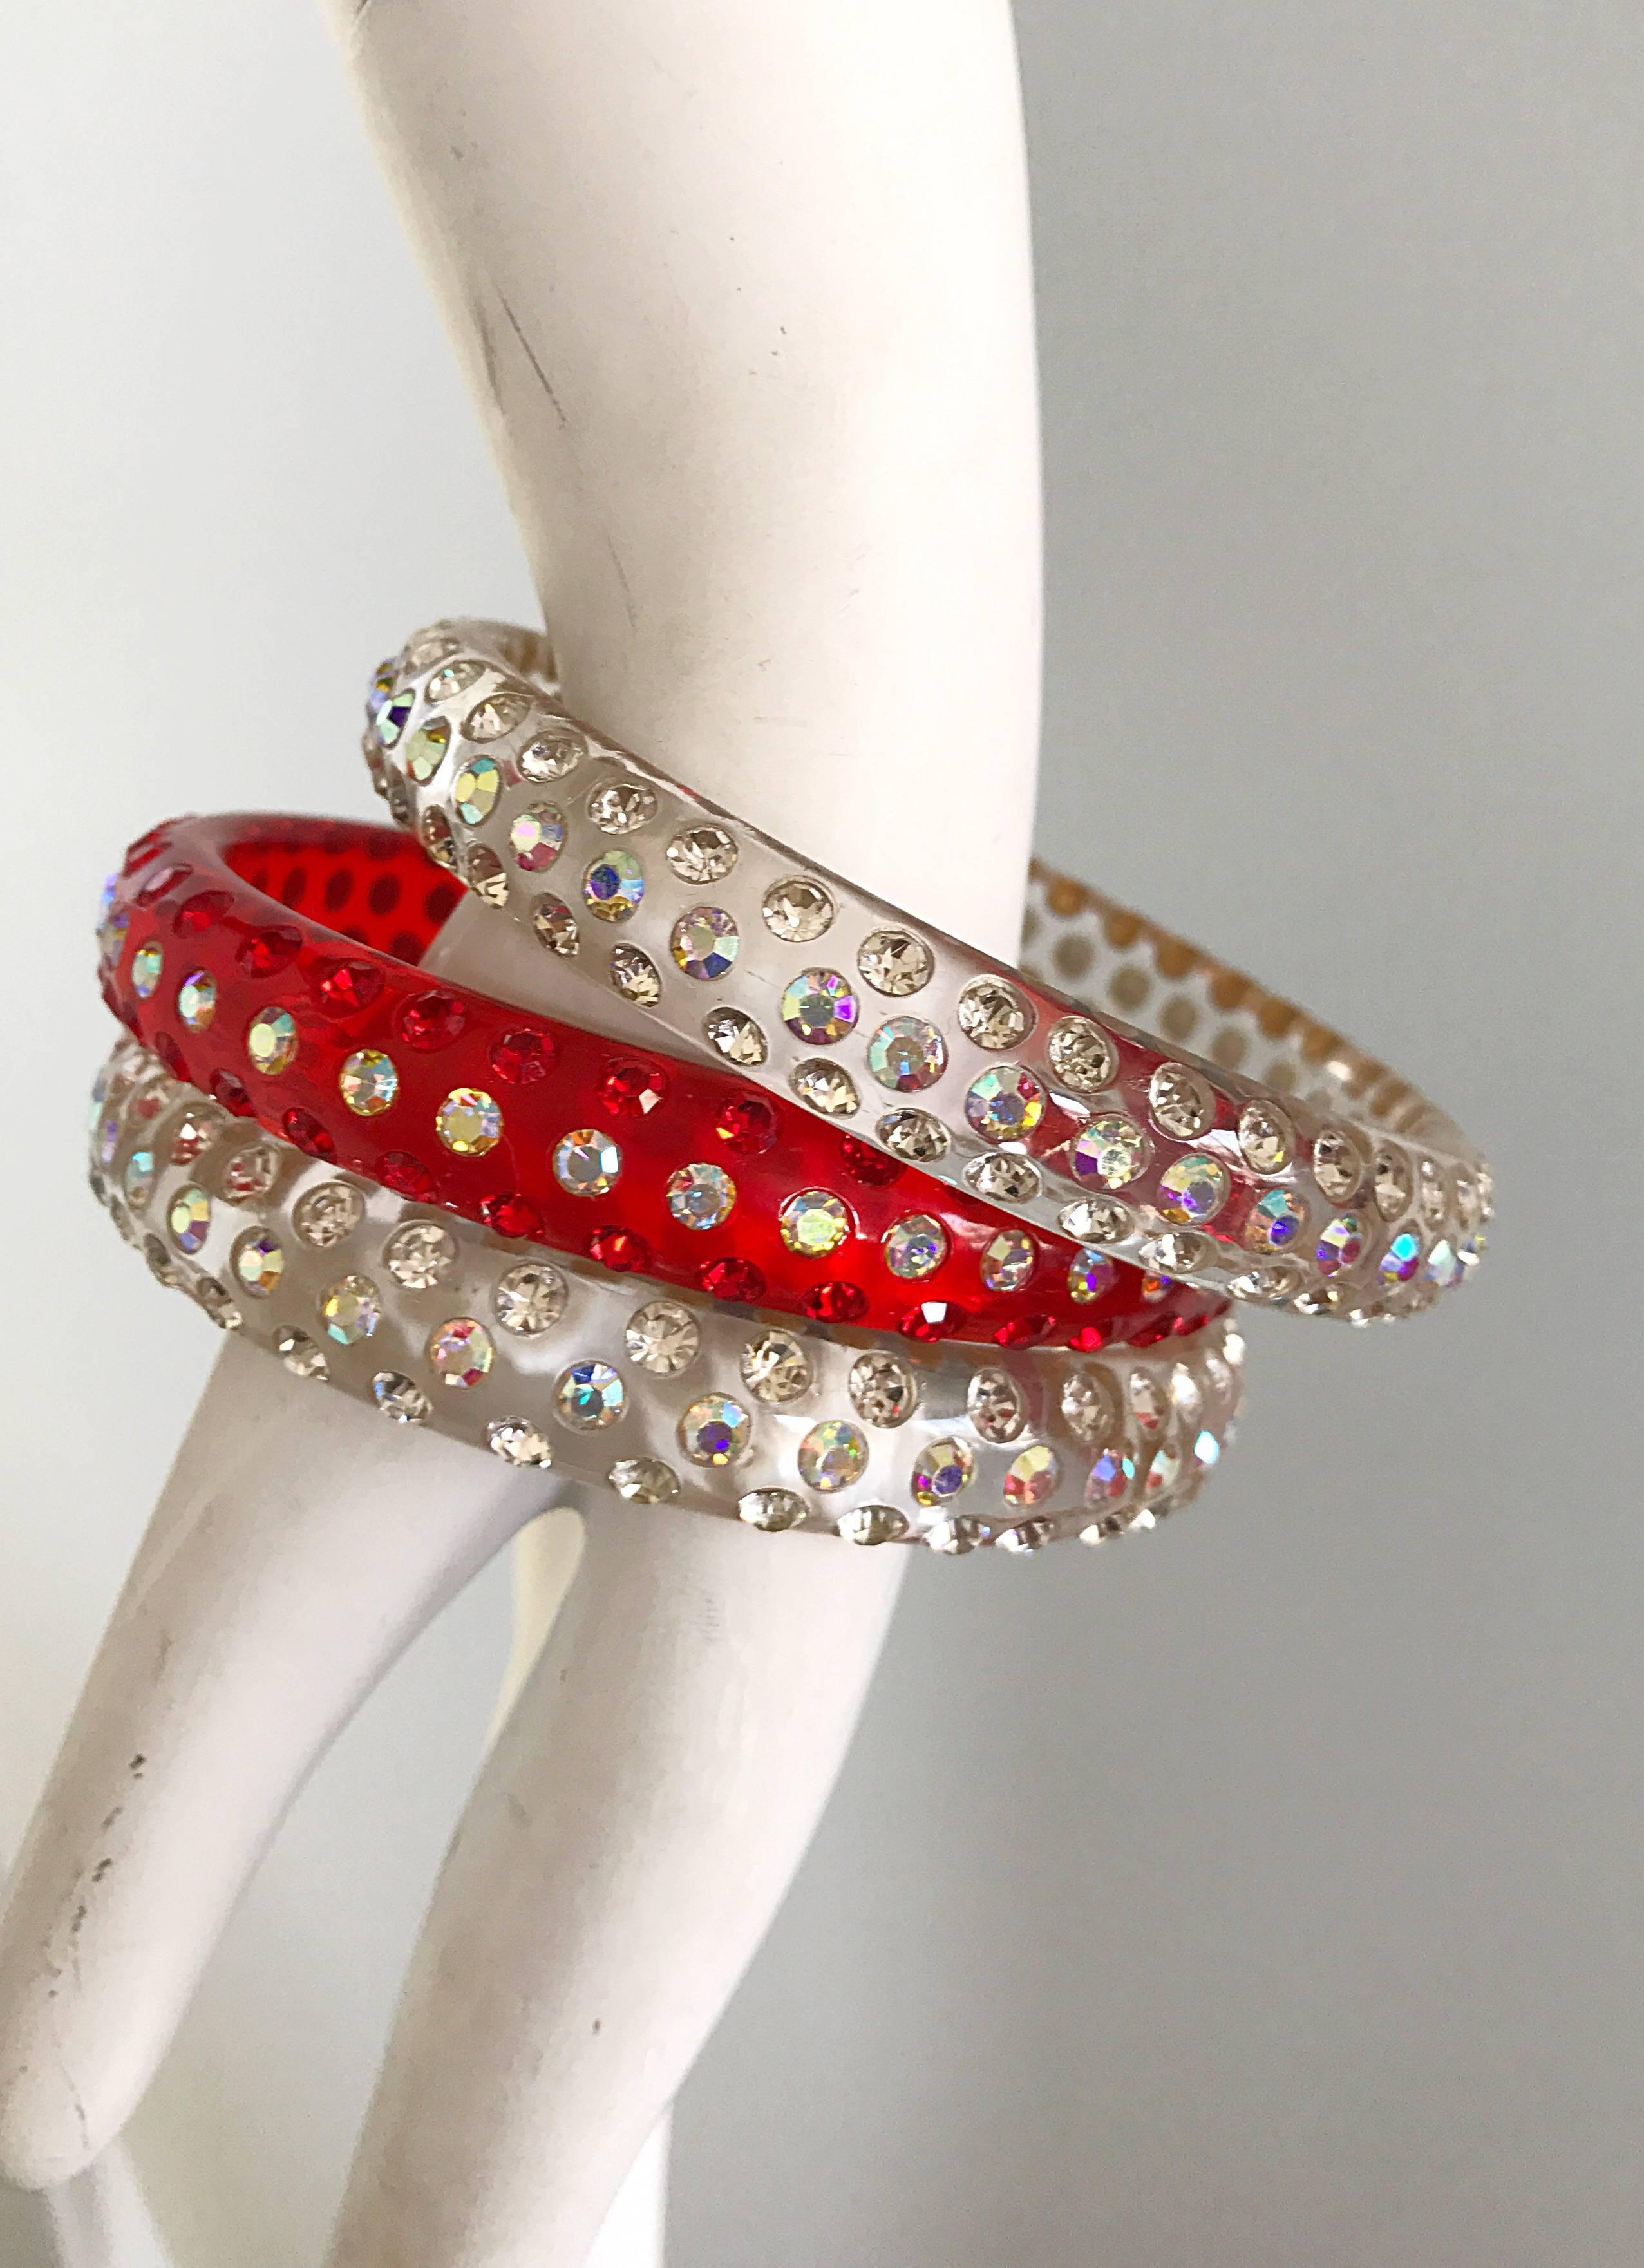 Lovely set of three red and clear lucite rhinestone encrusted bangle bracelets! Set consists of two clear bangles and one red one. Clear ones feature three rows of rhinestones, and red one features one row of rhinestones in the center, and two rows